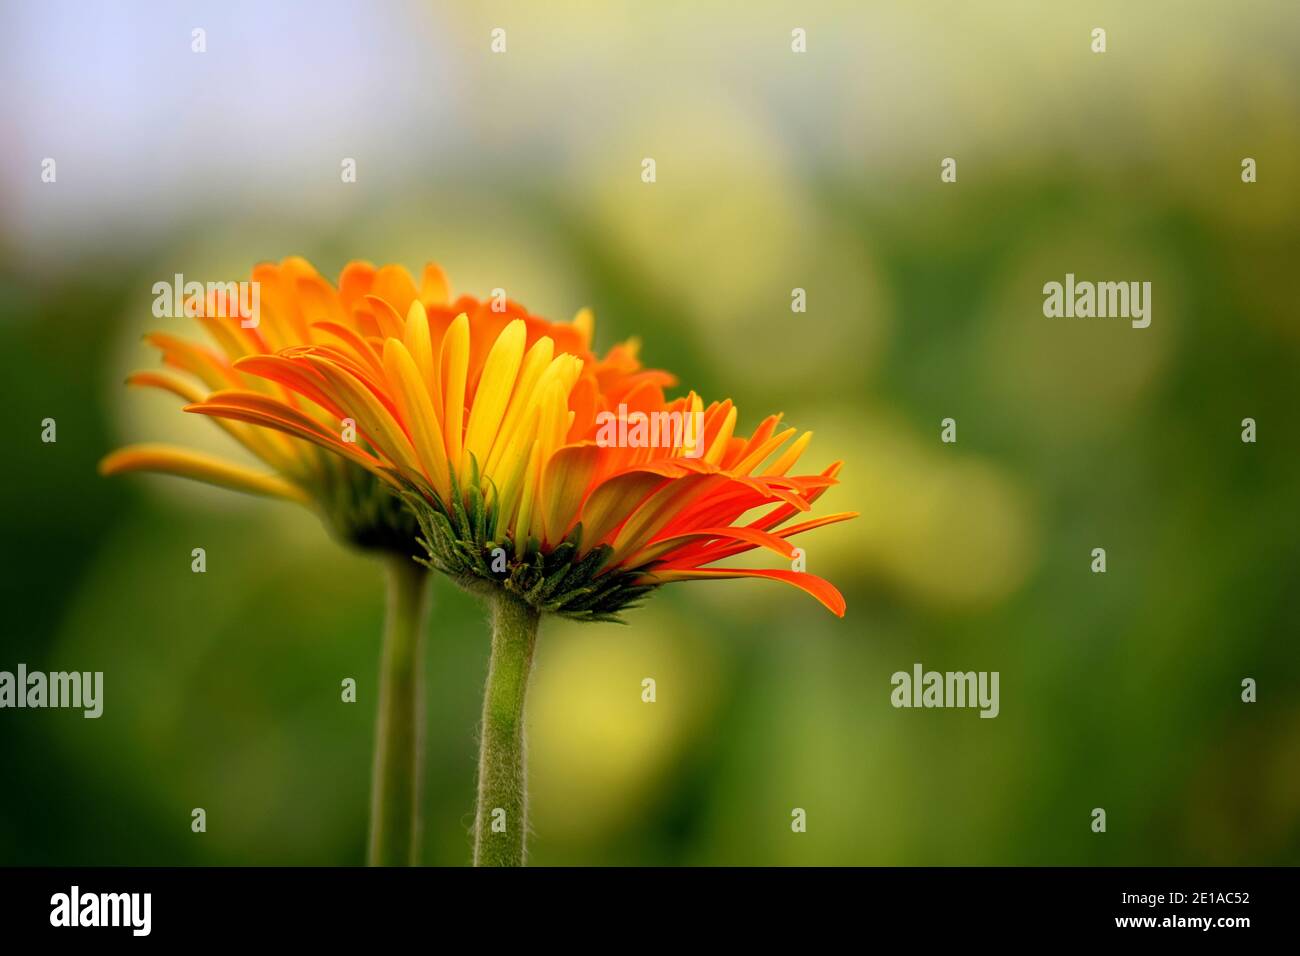 Two orange yellow colored Gerbera flowers also known as Gerbera daisies on green blurry background. Stock Photo